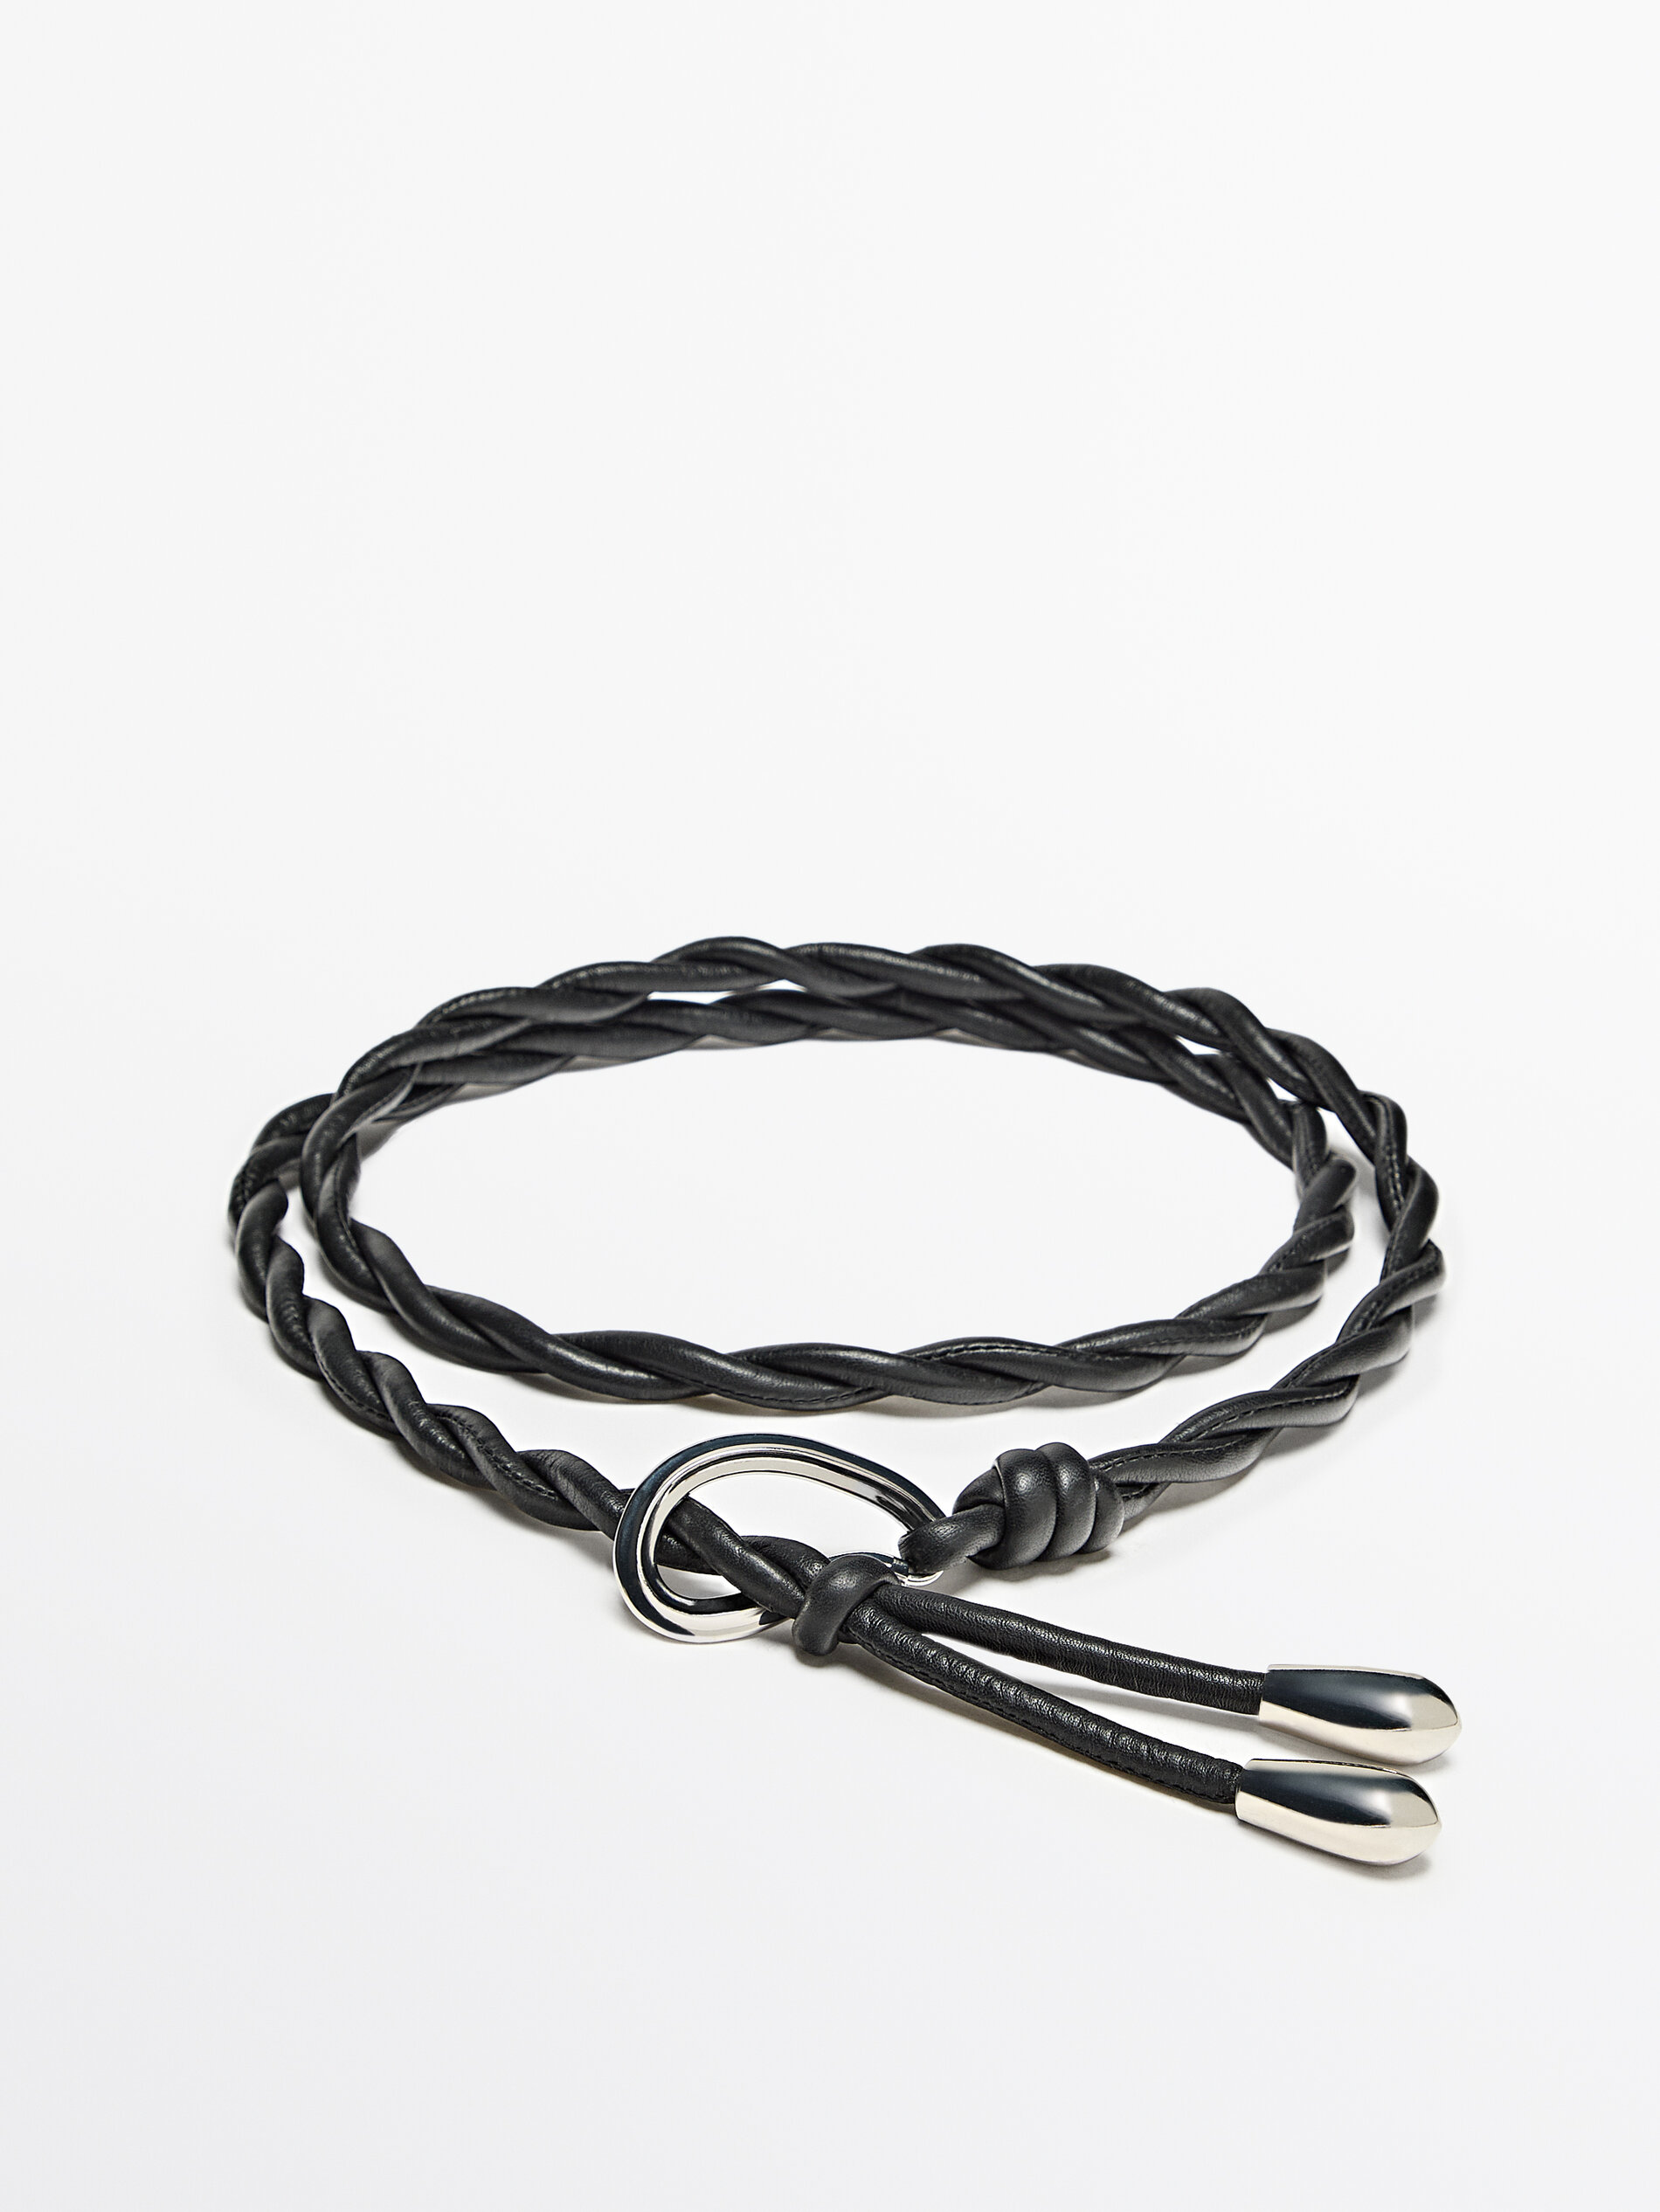 NAPPA LEATHER BRAIDED CORD BELT - LIMITED EDITION